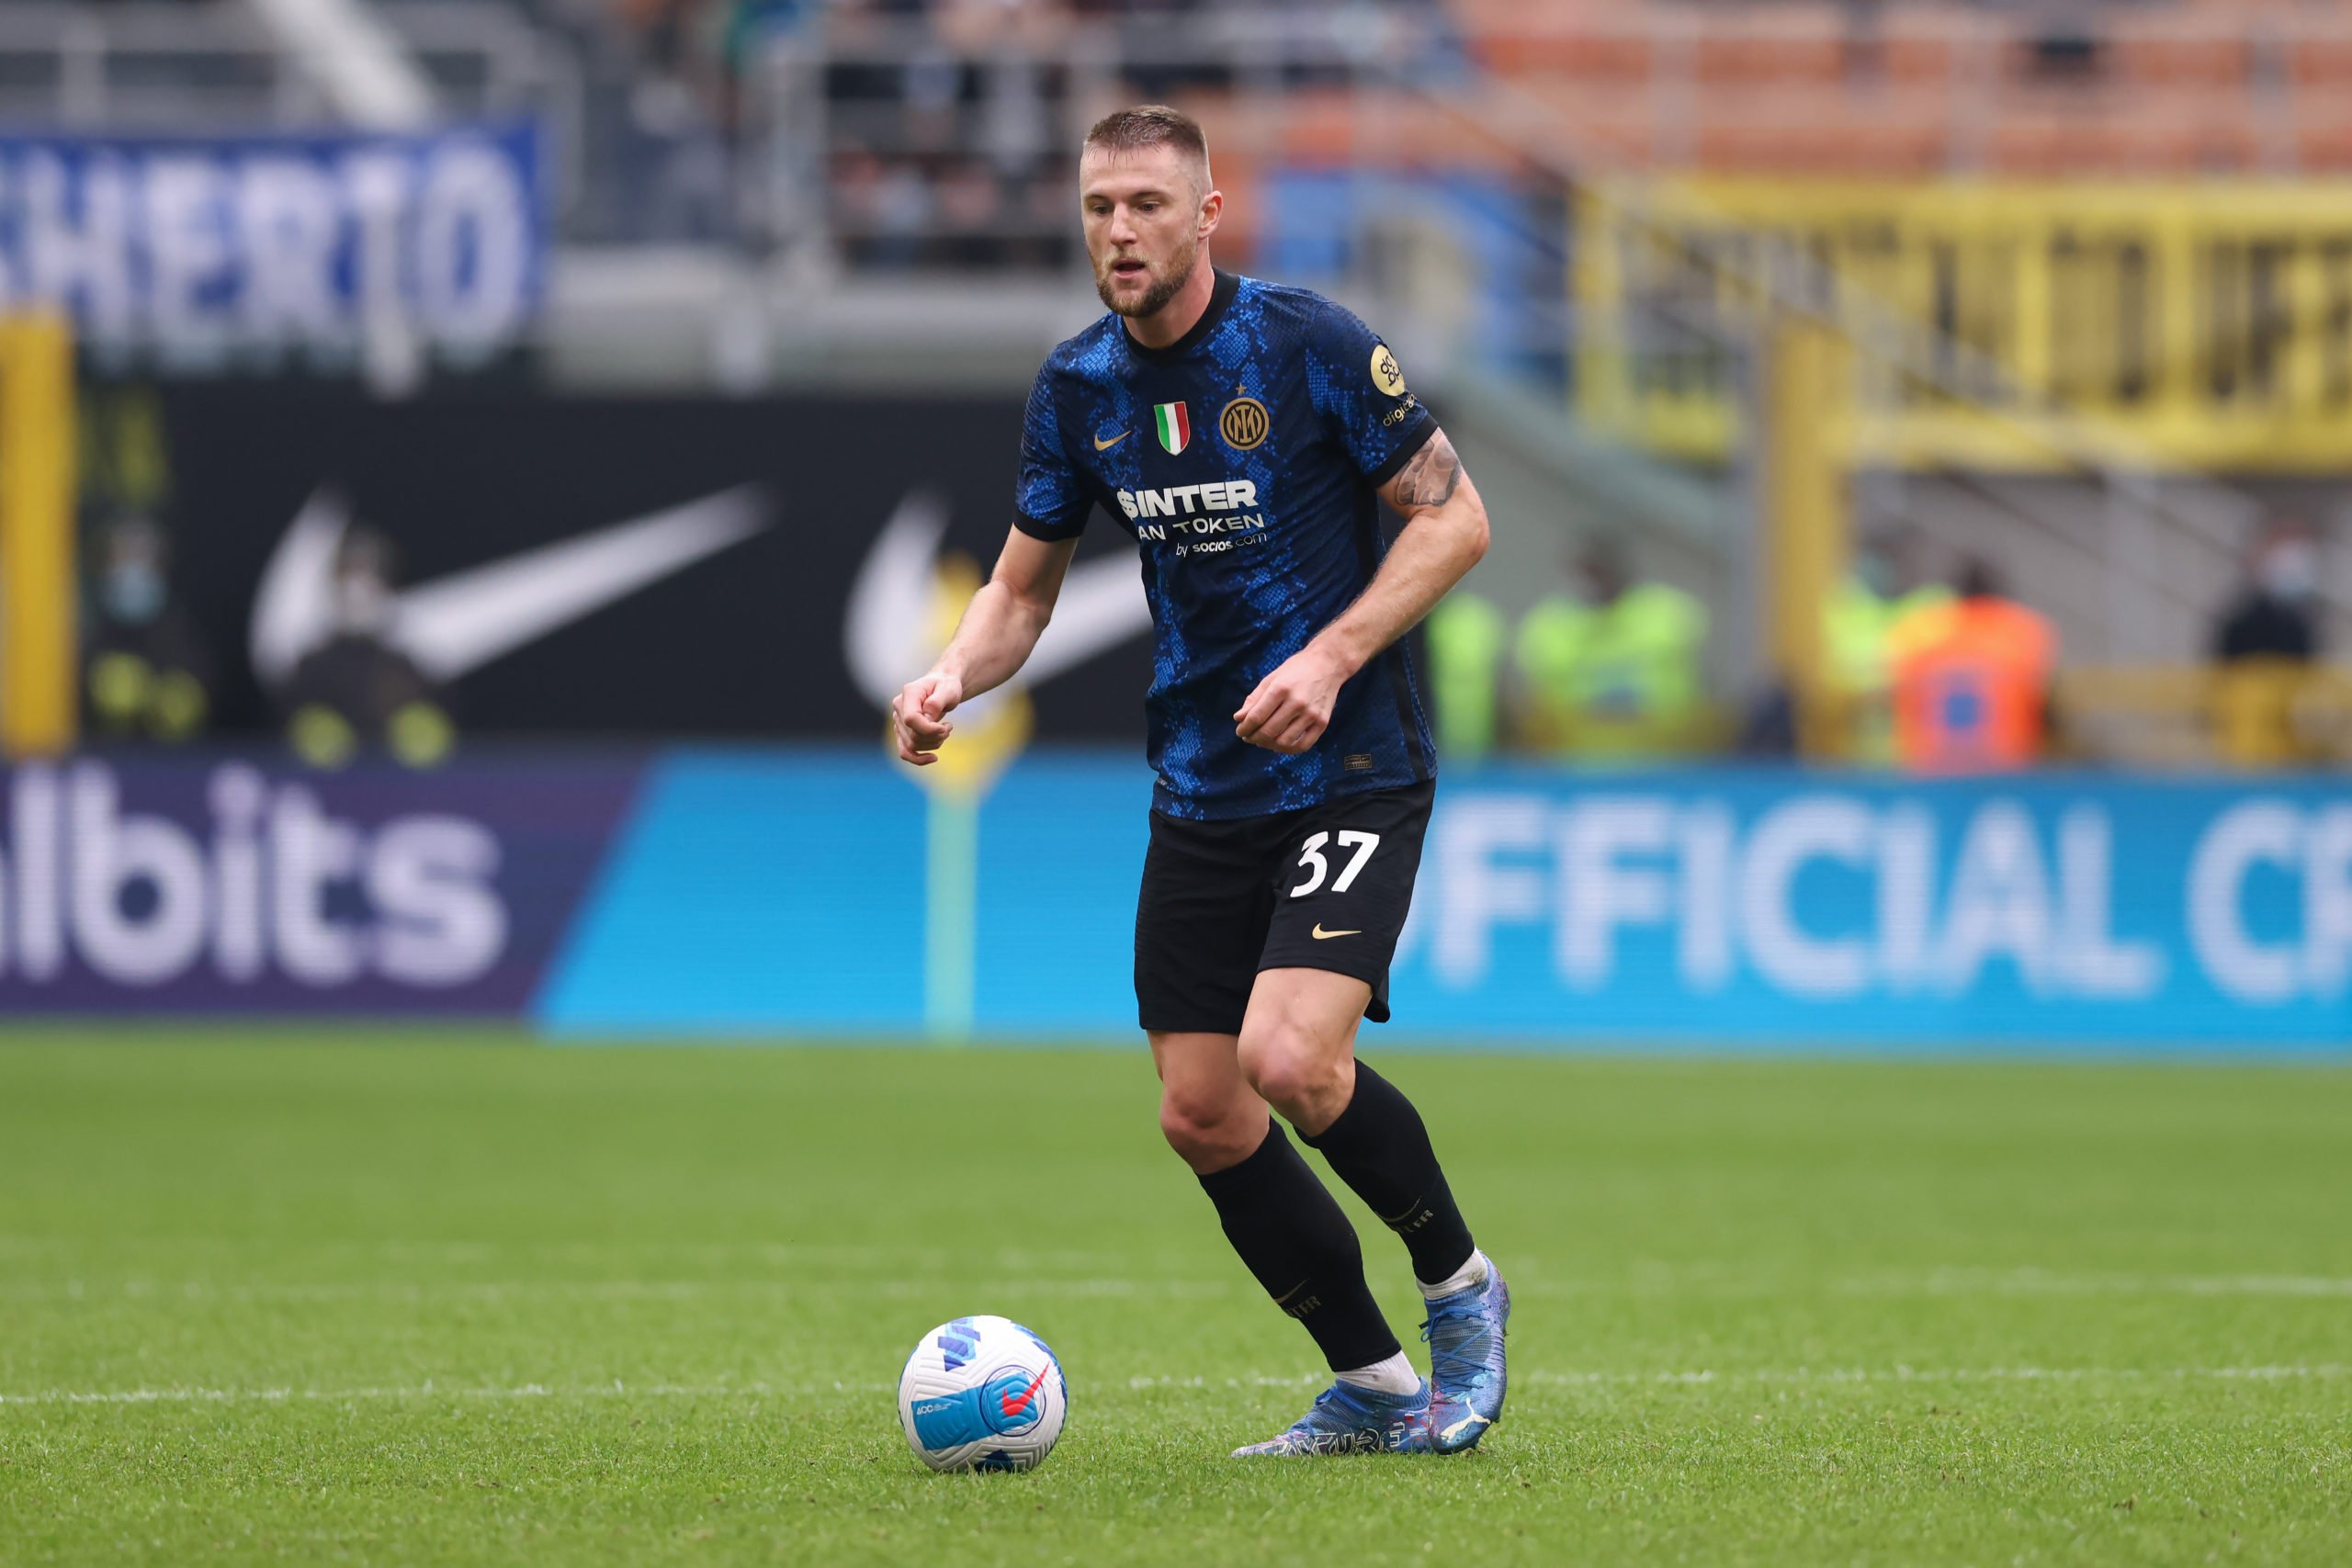 MILAN, ITALY - OCTOBER 31: Milan Skriniar of FC Internazionale during the Serie A match between FC Internazionale and Udinese Calcio at Stadio Giuseppe Meazza on October 31, 2021 in Milan, Italy. (Photo by Jonathan Moscrop/Getty Images)The 4th Official uses images provided by the following image agency: Getty Images (https://www.gettyimages.de/) Imago Images (https://www.imago-images.de/)